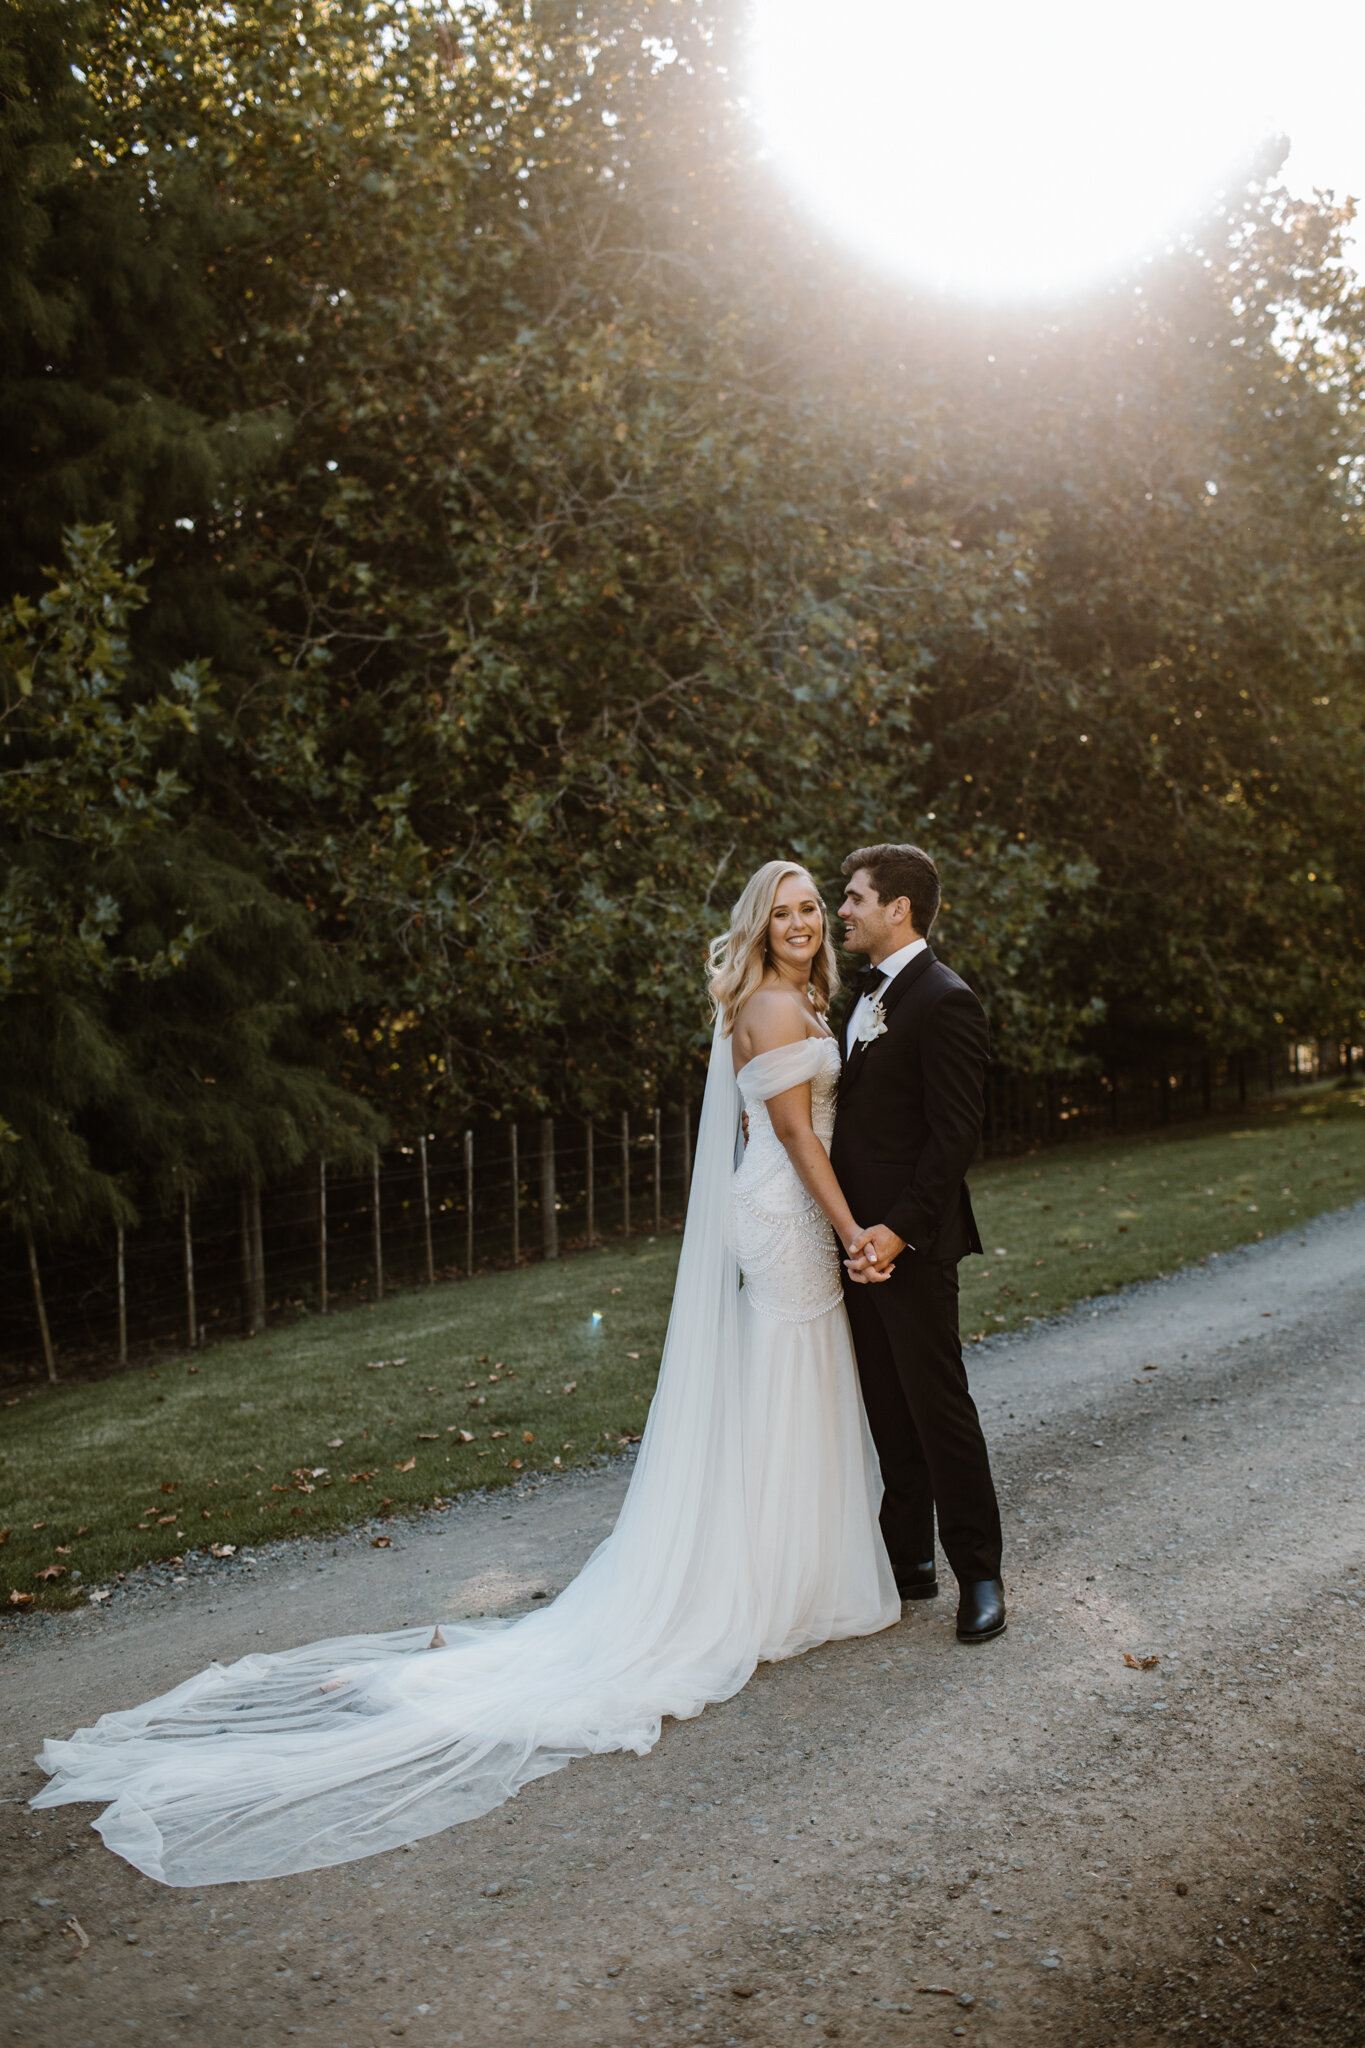 Our Brides | Sabine and Charl Wedding Journey